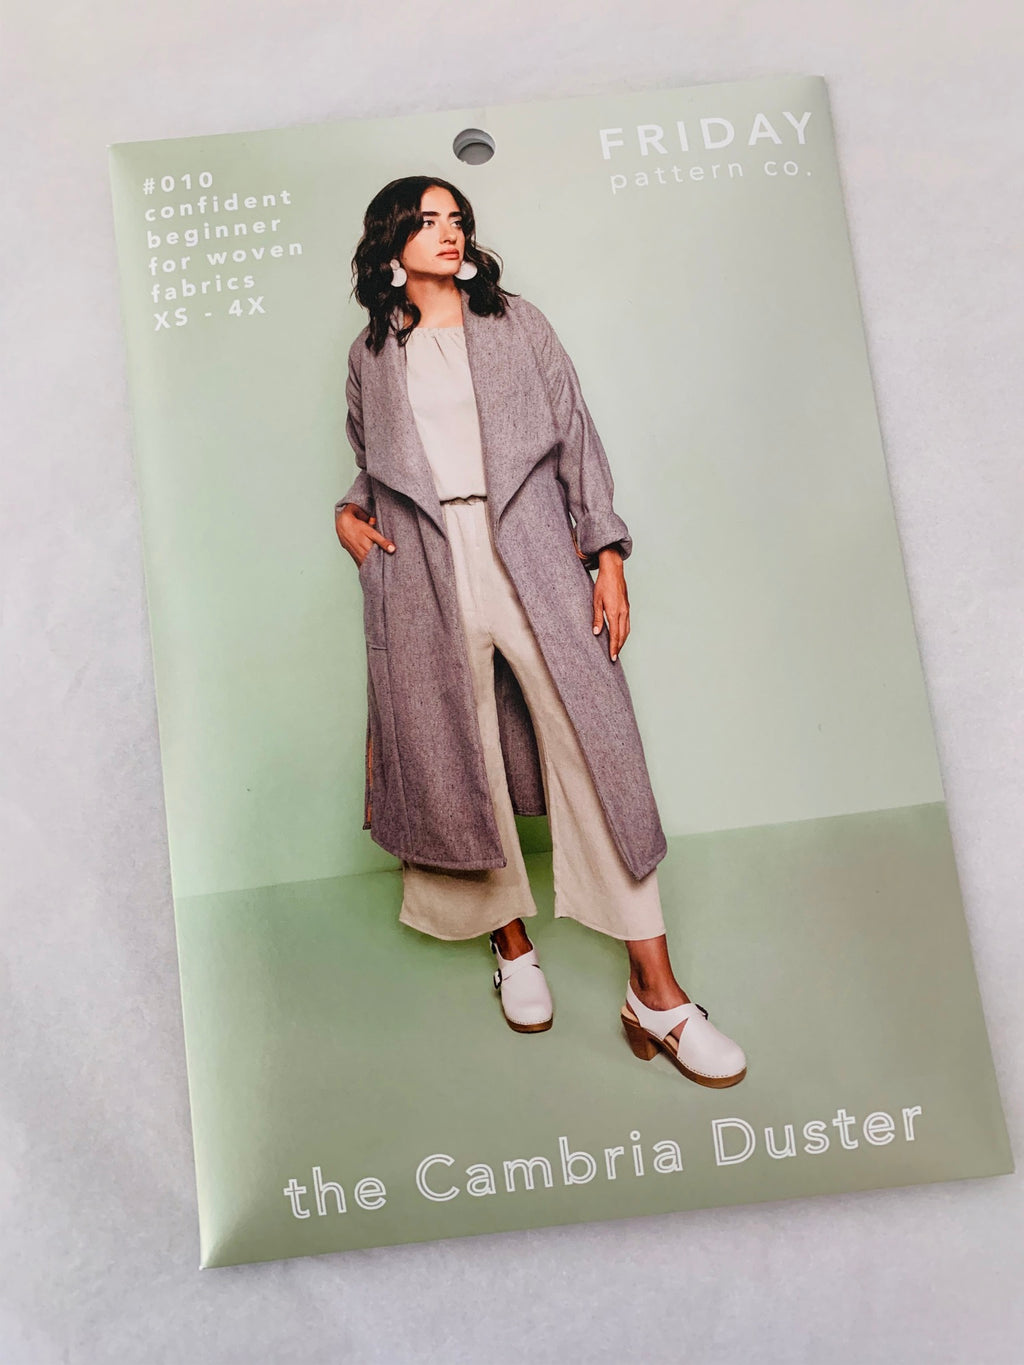 Friday Pattern Company: Cambria Duster Sewing Pattern